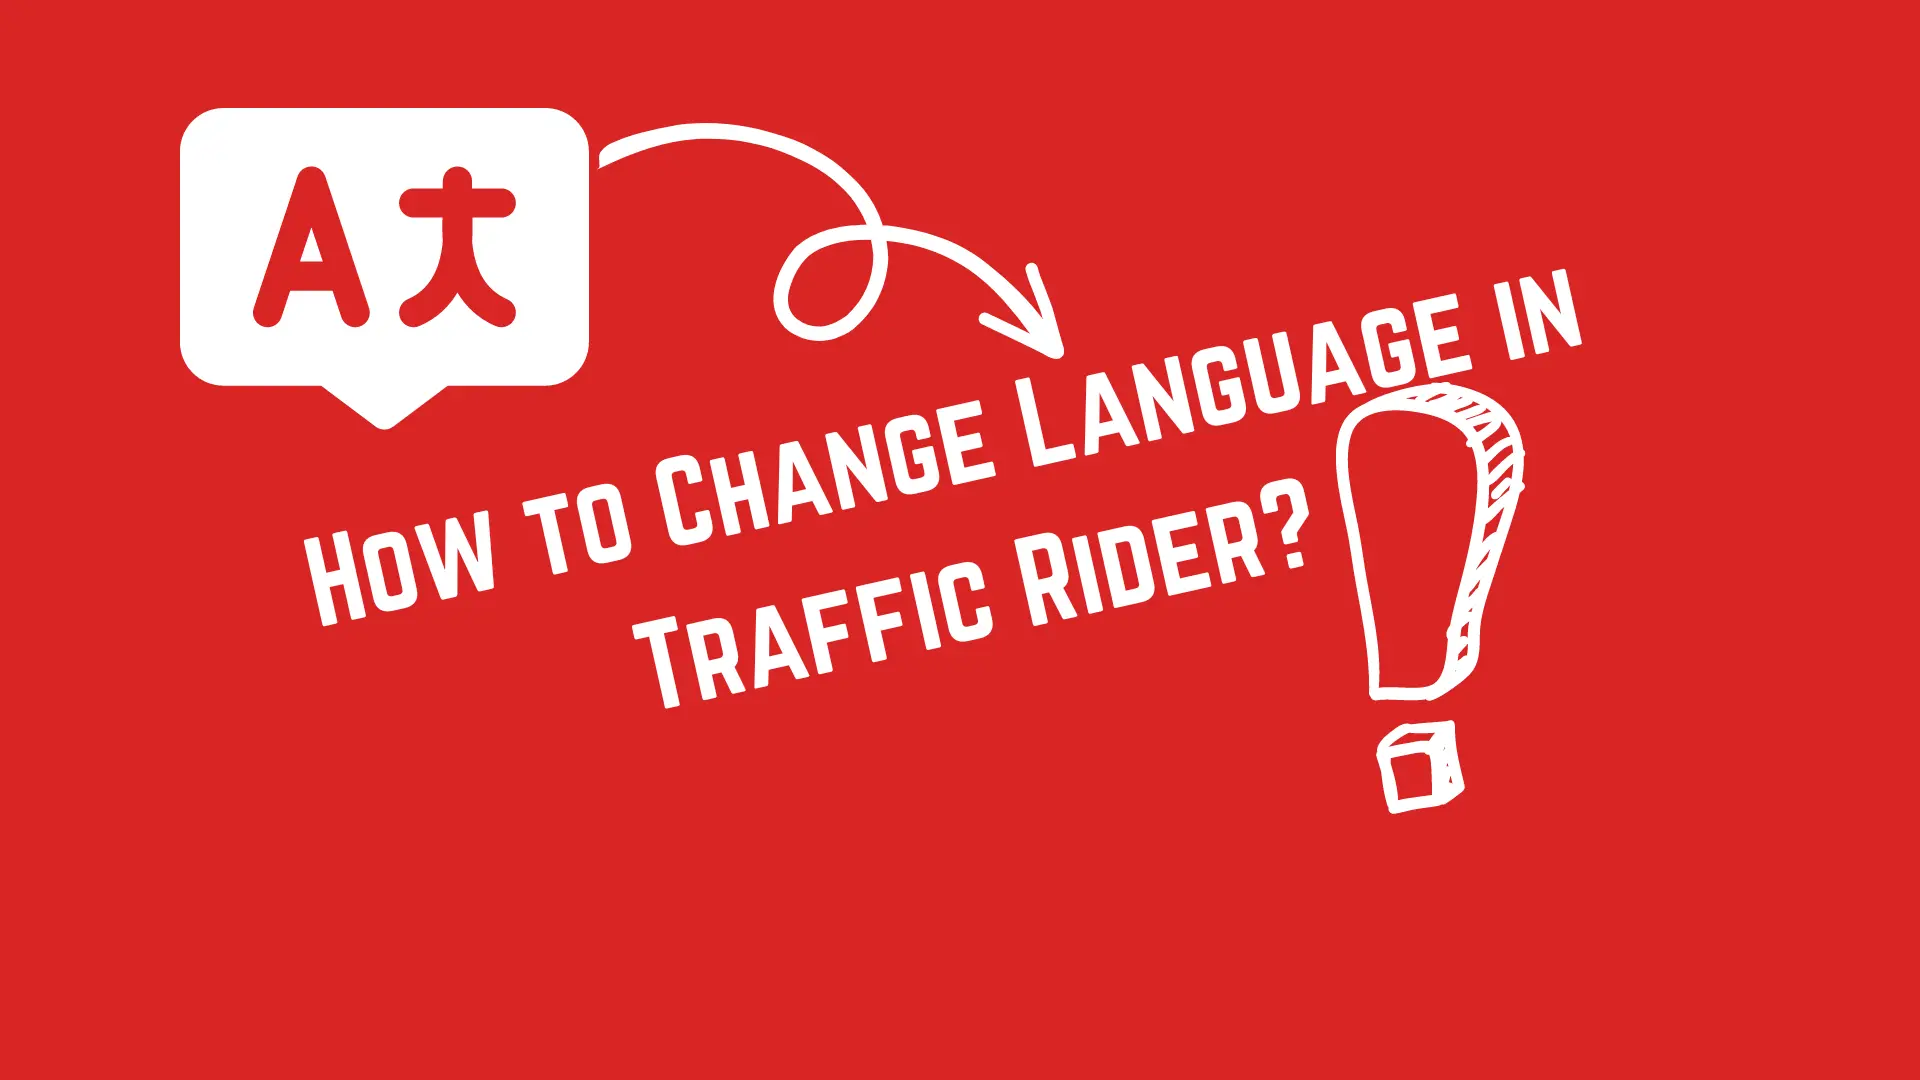 How to Change Language in Traffic Rider